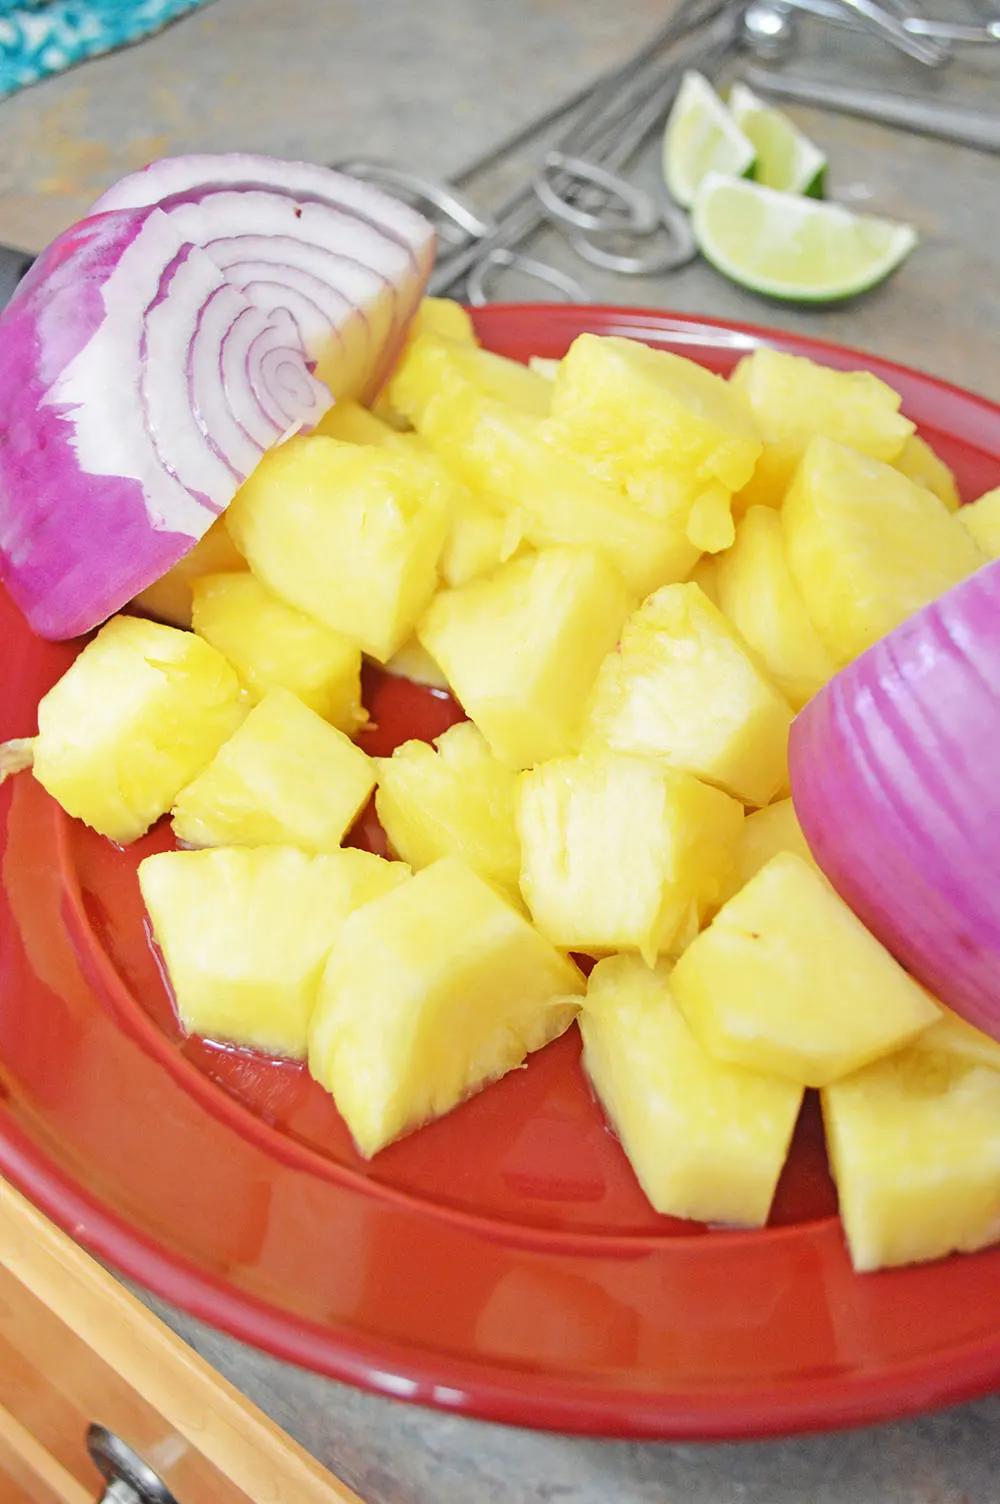 Red onion & diced pineapple in a red dish